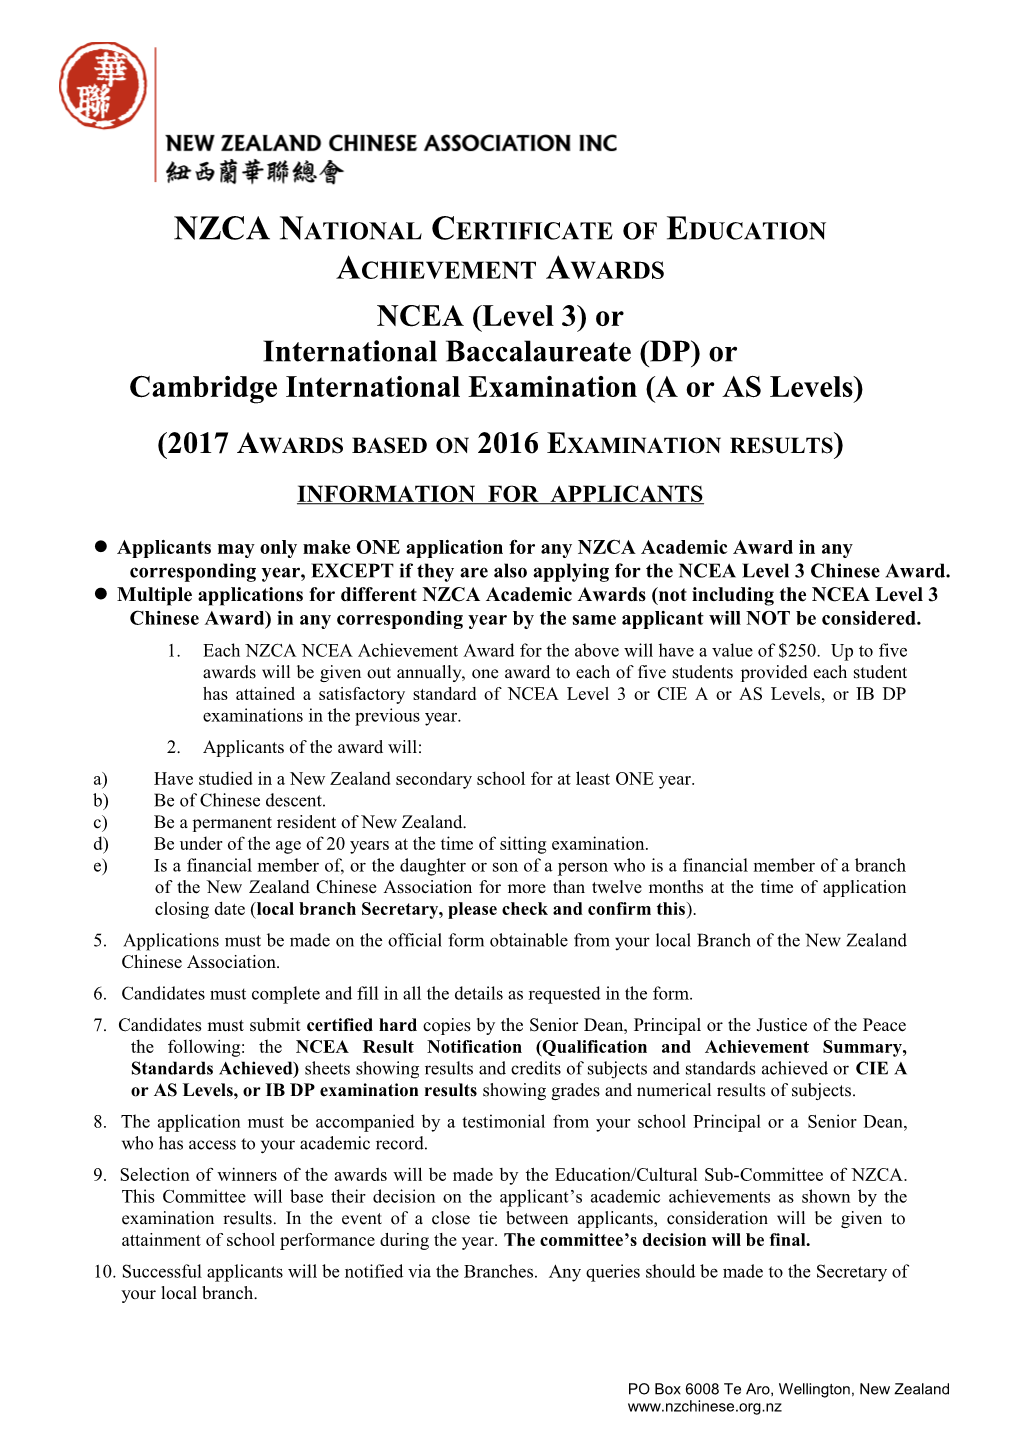 National Certificate of Education